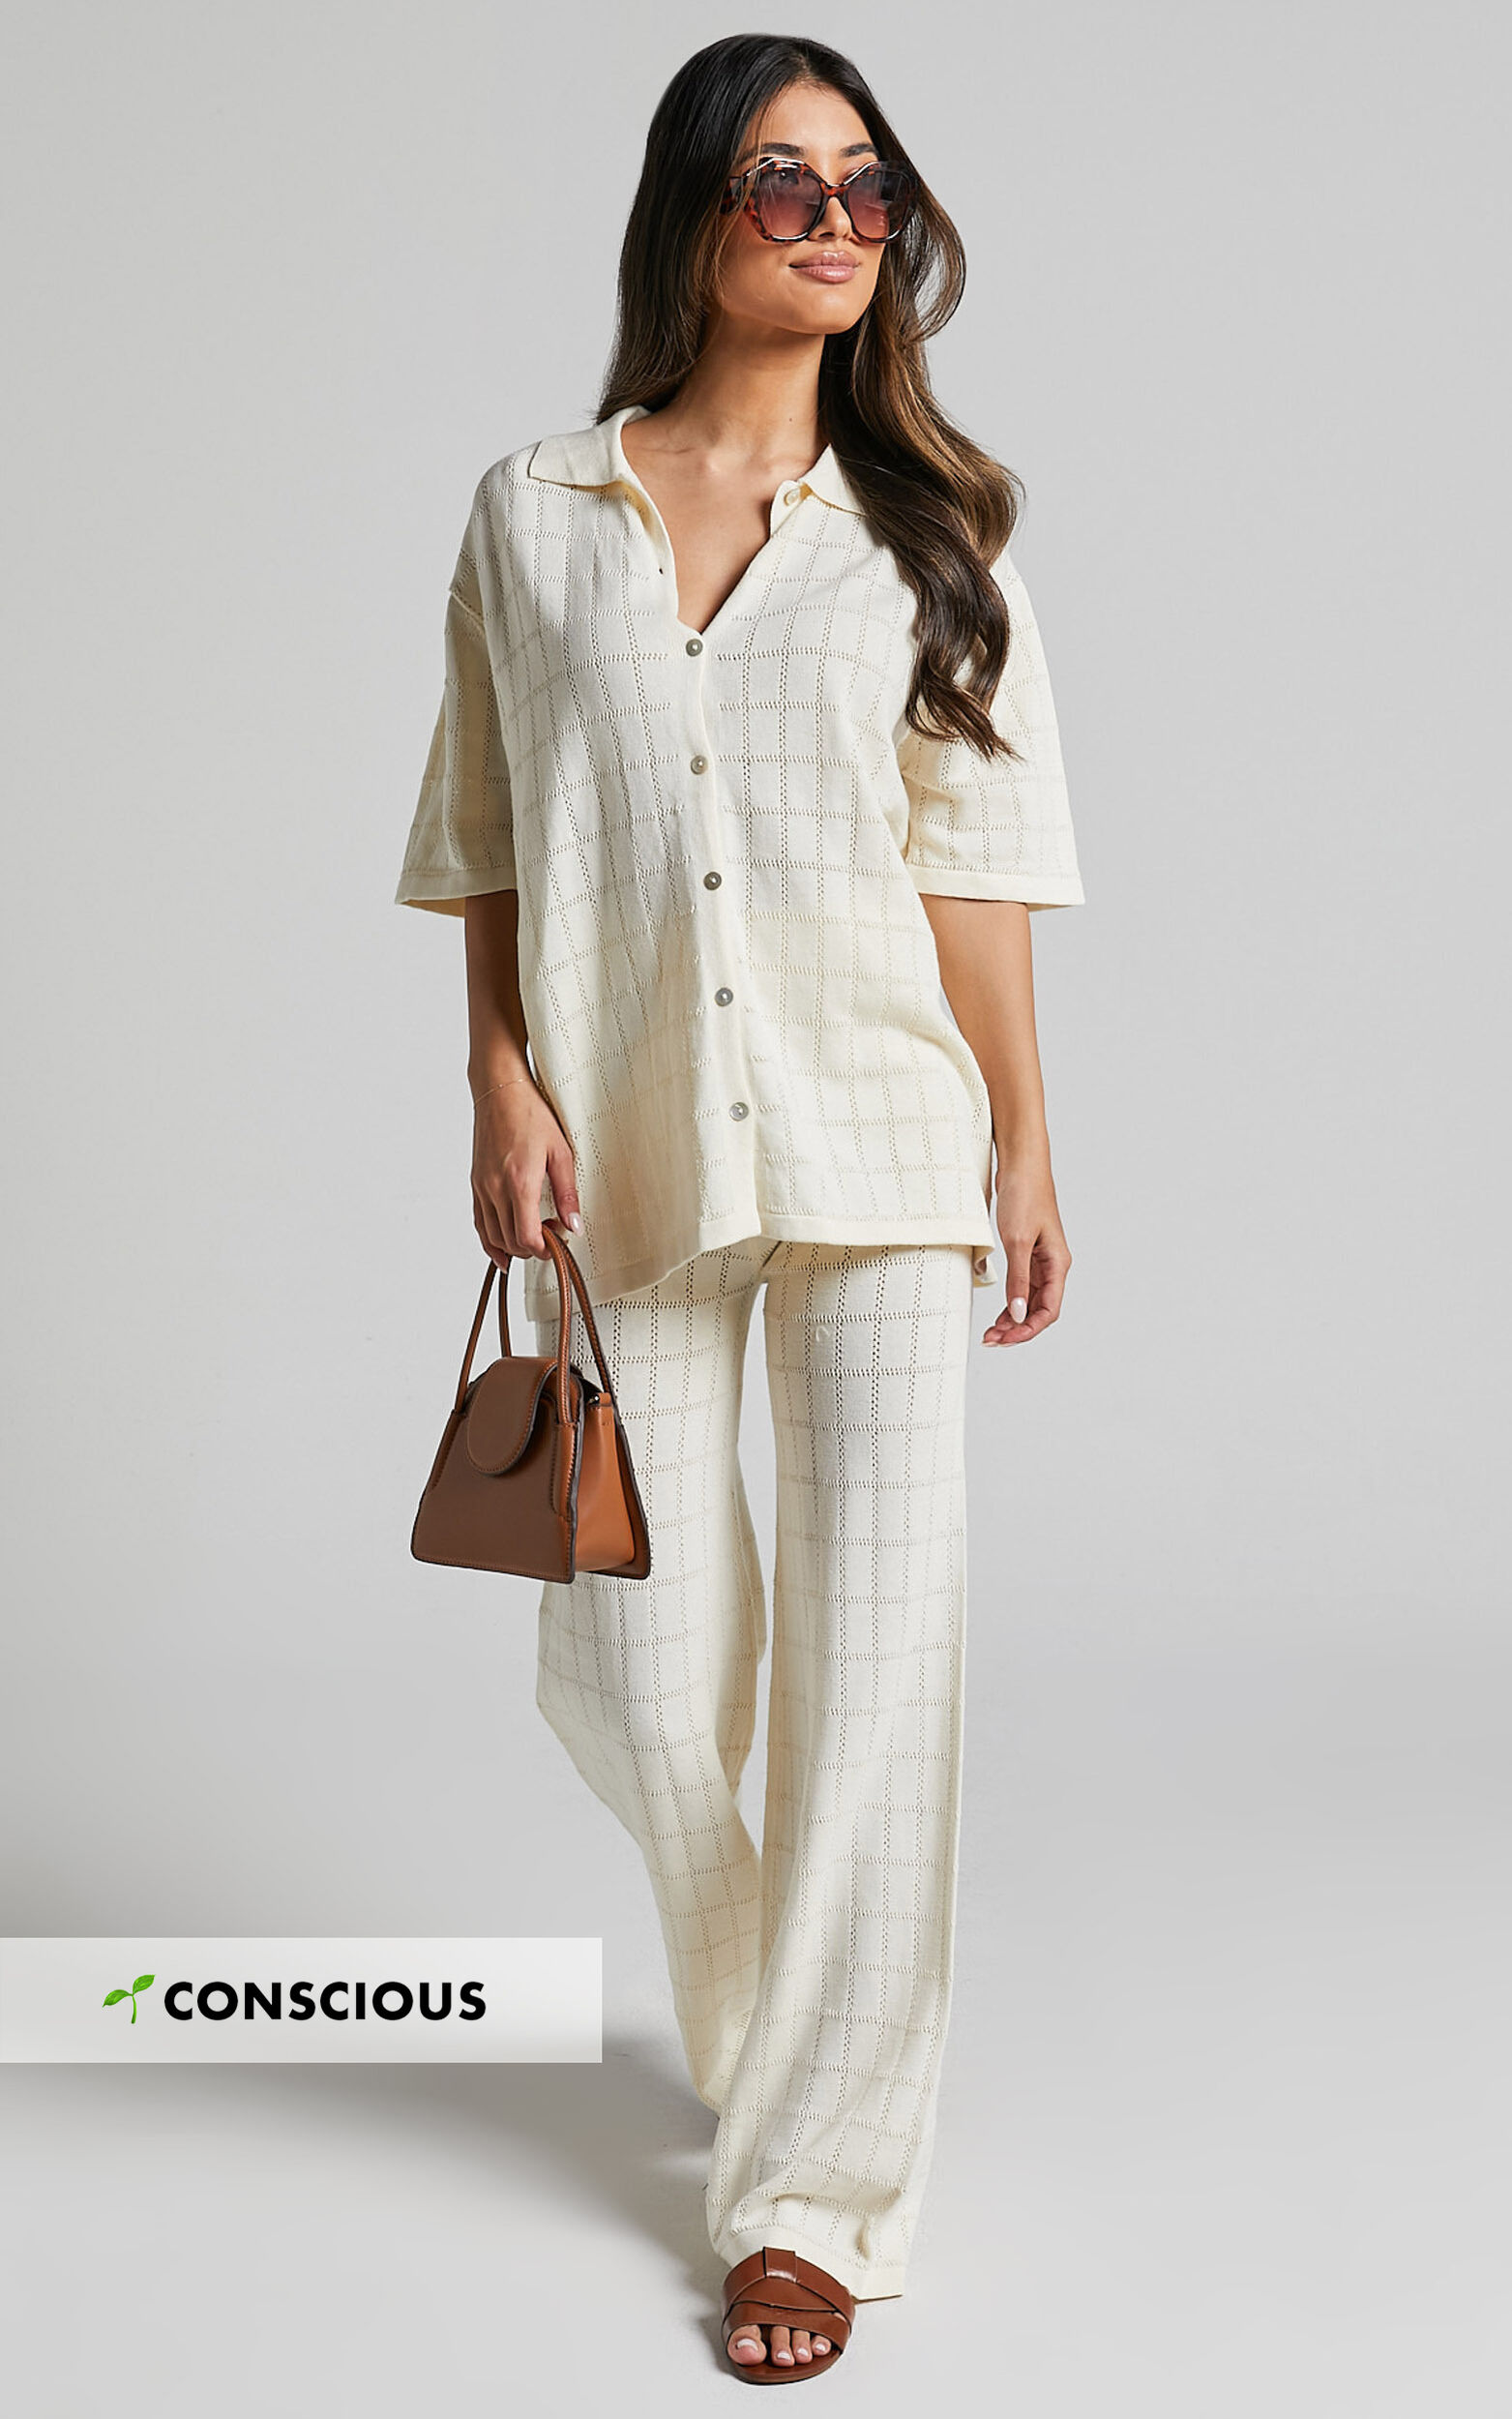 Tommy Two Piece Set - Knit Button Through Top and Pants Two Piece Set in Cream - 04, CRE1